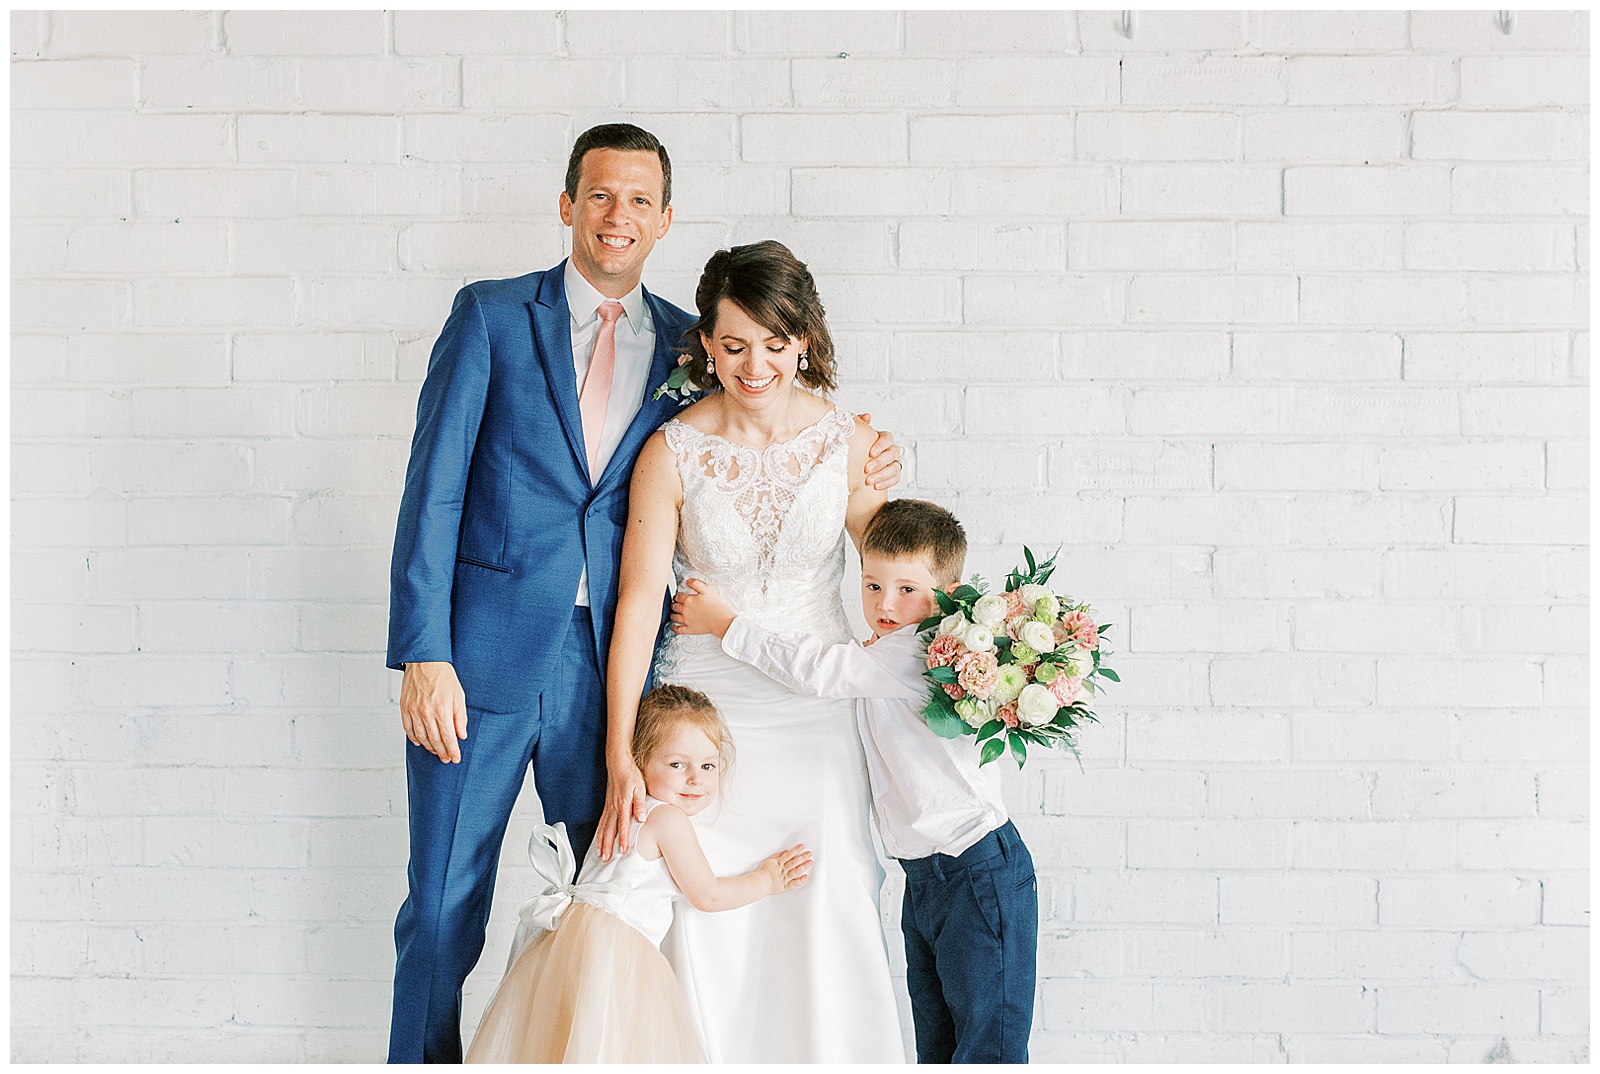 adorable shot with flower girl and ring bearer from indoor summer bride groom portraits of short brown haired bride in lace dress with long train and navy blue suited groom